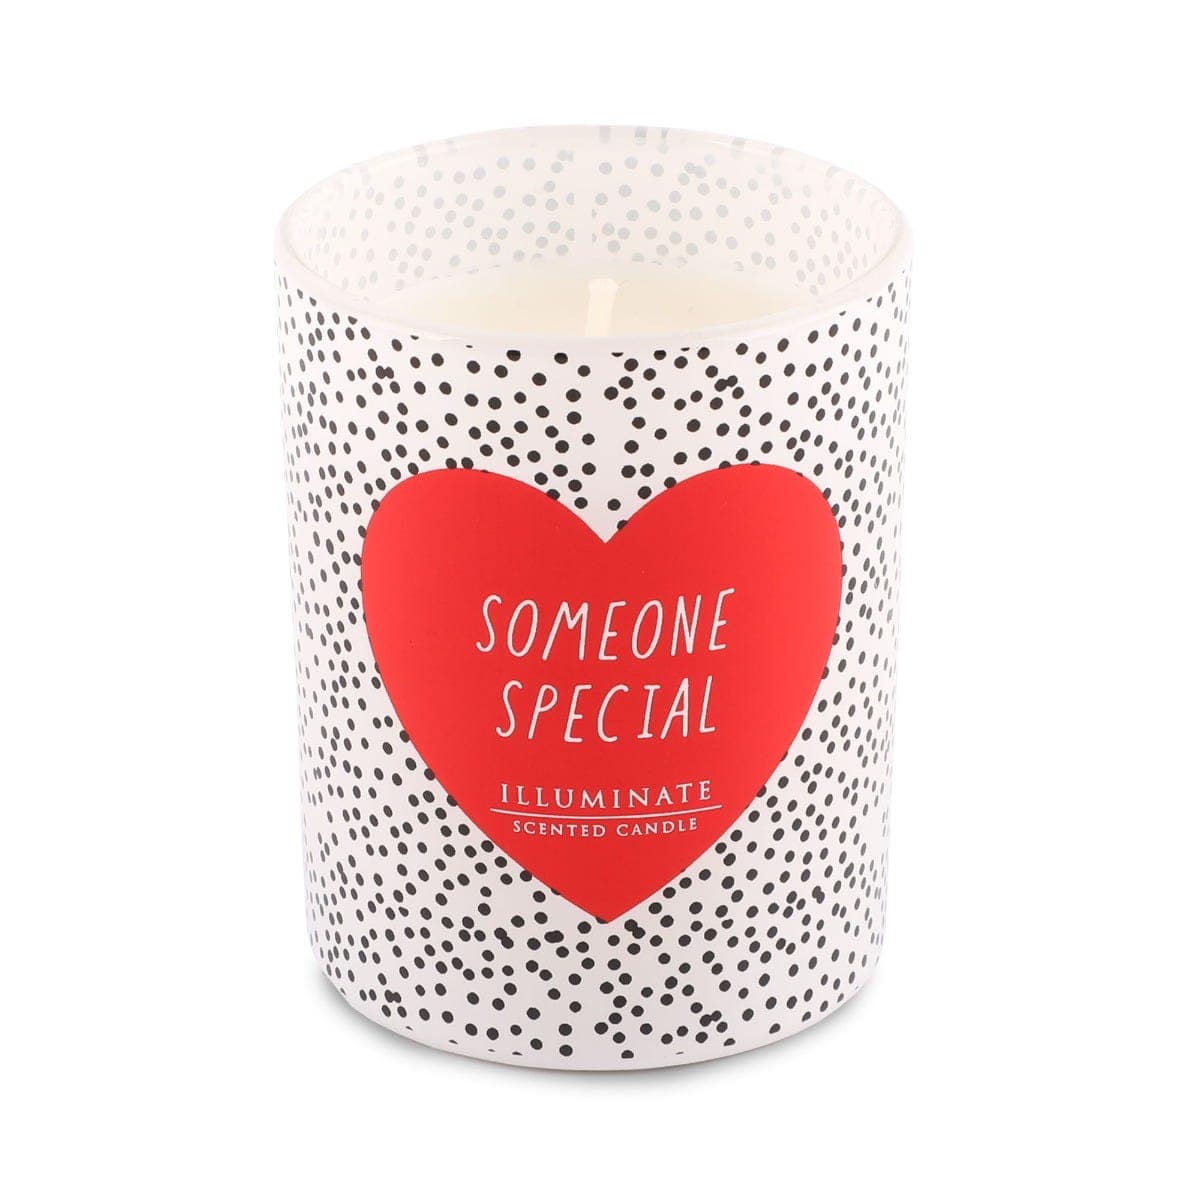 mother's day gifts uk; Clintons someone special scented candle